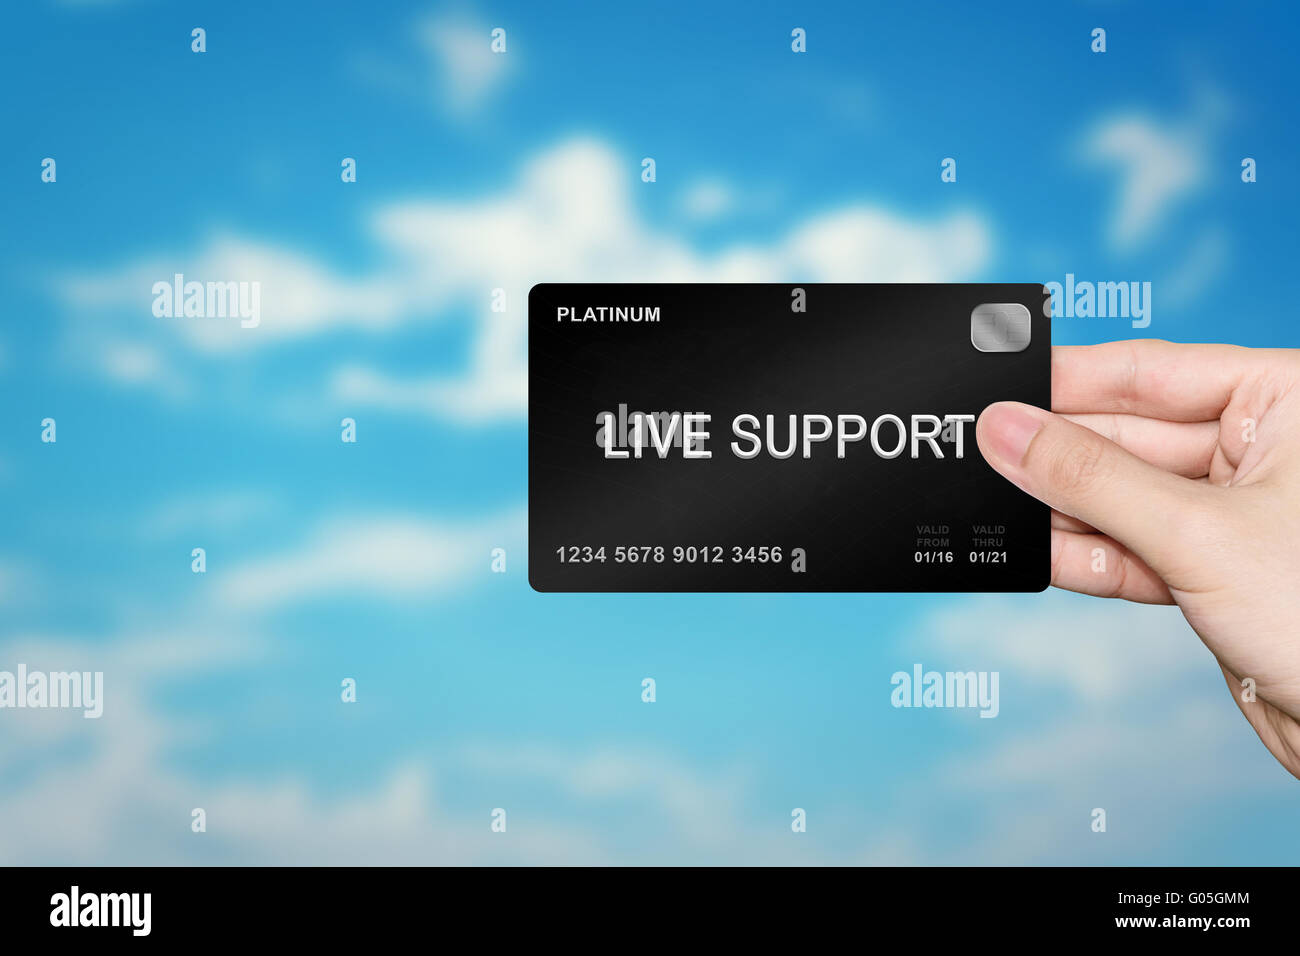 hand picking live support platinum card on blur background Stock Photo